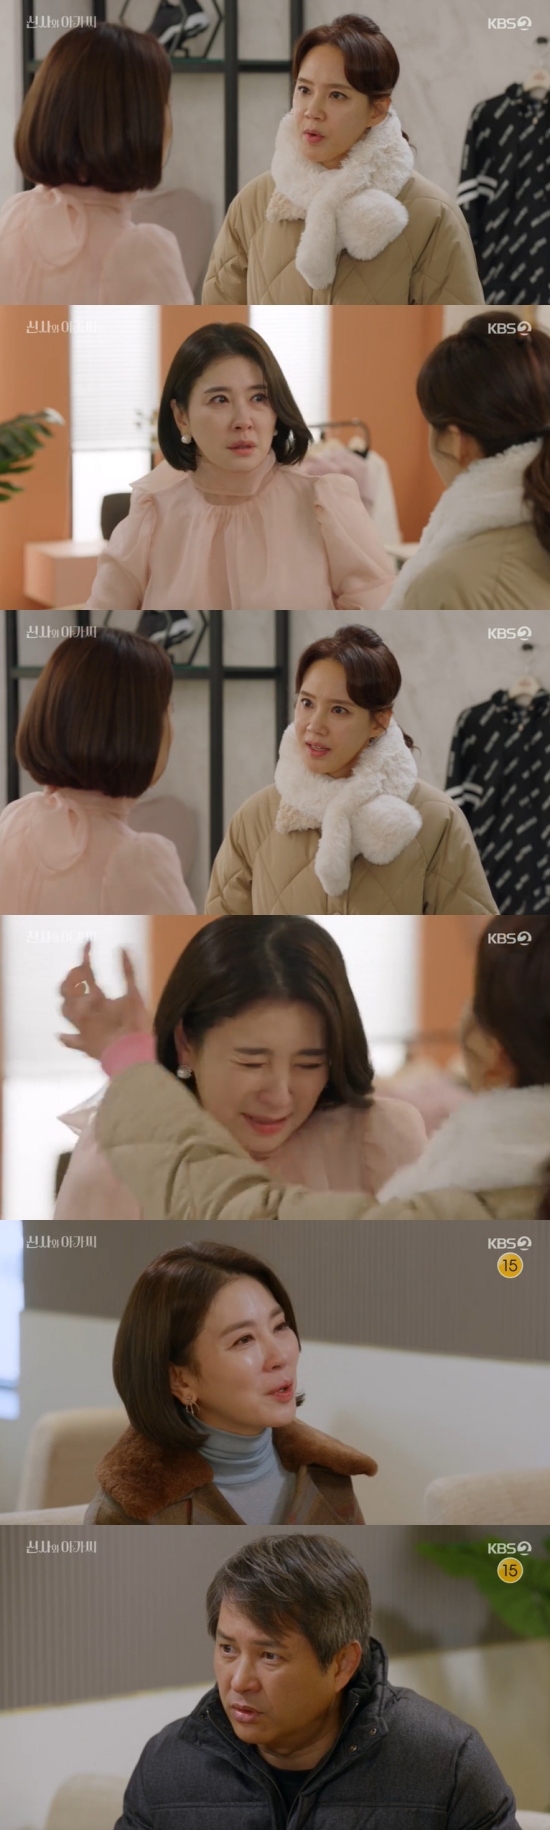 Will gentleman and young lady Ji Hyun Woo and Lee Se-hee know the identity of Lee Il-hwa?In the 40th KBS 2TV weekend drama Gentleman and Young Lady broadcast on the 12th, Anna Nicole Smith Kim (Lee Il-hwa) was shown to Cha Yeon-sil (Oh Hyun-kyung) that she was the birth mother of Lee Se-hee.On this day, Lee Young-guk (Ji Hyo) heard that the name of the birth mother of the beat was Kim Ji Young, and thought Anna Nicole Smith Kim might be the same person as the birth mother of the beat.However, Lee Yeong-guk denied that there were many people named Kim Ji Young, and began to look for the whereabouts of Park Dan-dans birth mother.In addition, Cha Yeon-sil suspected the relationship between Park Su-cheol and Anna Nicole Smith Kim as an affair, and visited Anna Nicole Smith Kim and questioned him.Cha Yeon-sil said, Why did you put your arms in her arms? And Anna Nicole Smith Kim explained, I was only supported.Cha Yeon-sil was angry when she heard Anna Nicole Smith Kim was sick.He said, Are you having cancer surgery? Was it all about you?Youre the reason you spent the night in the hospital doing all the work, and you called my husband out at night to nurse him?What the hell did you do to my husband? After that, Anna Nicole Smith Kim met Park Su-cheol and handed over the envelope. Anna Nicole Smith Kim said, I am so sorry for you and I am so grateful for so many things.You can think of it as a child support fee that Dandan has raised, you can think of it as alimony, and I am so grateful to send it with Dandan. But Park Soo-cheol said, Do you think Dan Dan sends you to like you? I told you. Never tell me youre a mother.You are just Anna Nicole Smith Kim to our Dandan. At this time, Cha Yeon-sil appeared in front of Park Su-cheol and Anna Nicole Smith Kim and asked, What is the mother of Dandan? What is this? Is this the mother of Dandan?Park Soo-cheol took the car room out of the cafe and said that Anna Nicole Smith Kim was late to know that she was the birth mother of Park Dan-dan.Park Soo-cheol said, Think about you, she is not your mothers face. The car said, Yes, the Dandan I saw 27 years ago is not your face.Park Soo-chul said, I had a big accident 10 years ago and I had 10 more plastic surgery. So I did not know at first.Then she knew that Dandan was her mother and said she was not going to United States of America. Even if you told me to go, I did not go. Park Su-cheol urged Anna Nicole Smith Kim to send the United States of America to separate the two starlets.In the end, Cha Yeon-sil promised Park that he would not reveal the truth.In the next trailer, both Lee Young-guk and Park Dan-dan were caught in shock by knowing the identity of Anna Nicole Smith Kim.Photo = KBS Broadcasting Screen